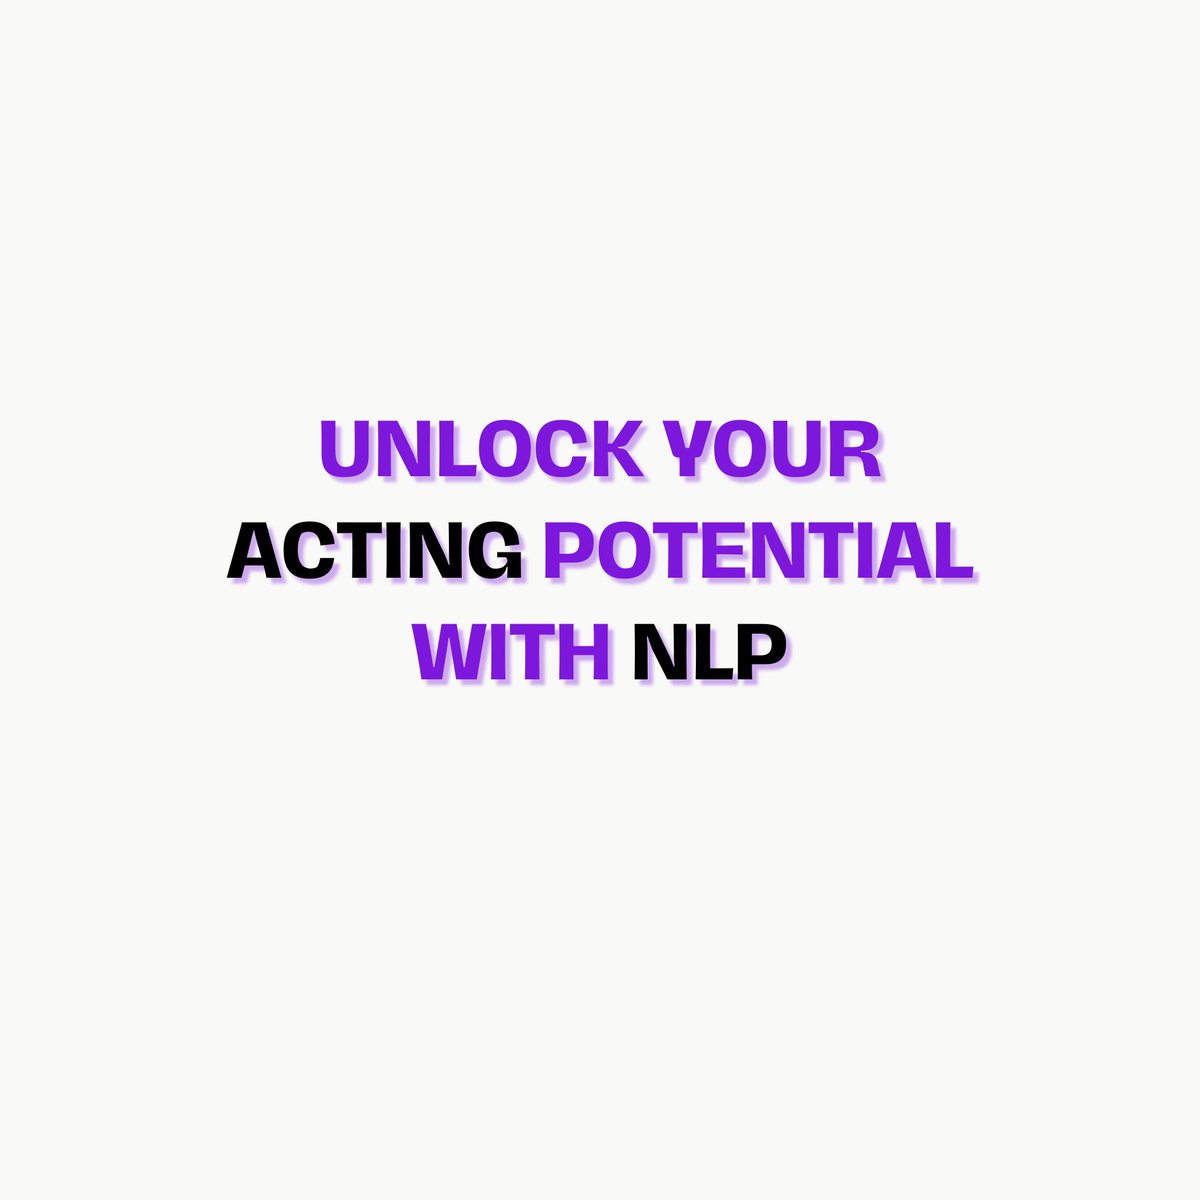 Unlock your potential with NLP (Neuro-Linguistic Programming)!

It helps you:

Master emotions (think beyond words!)
Dive deeper into characters (richer performances!)
Sharpen communication (nailing lines & director cues)
Level up your craft with NLP!  #NLP #actors #actingtips